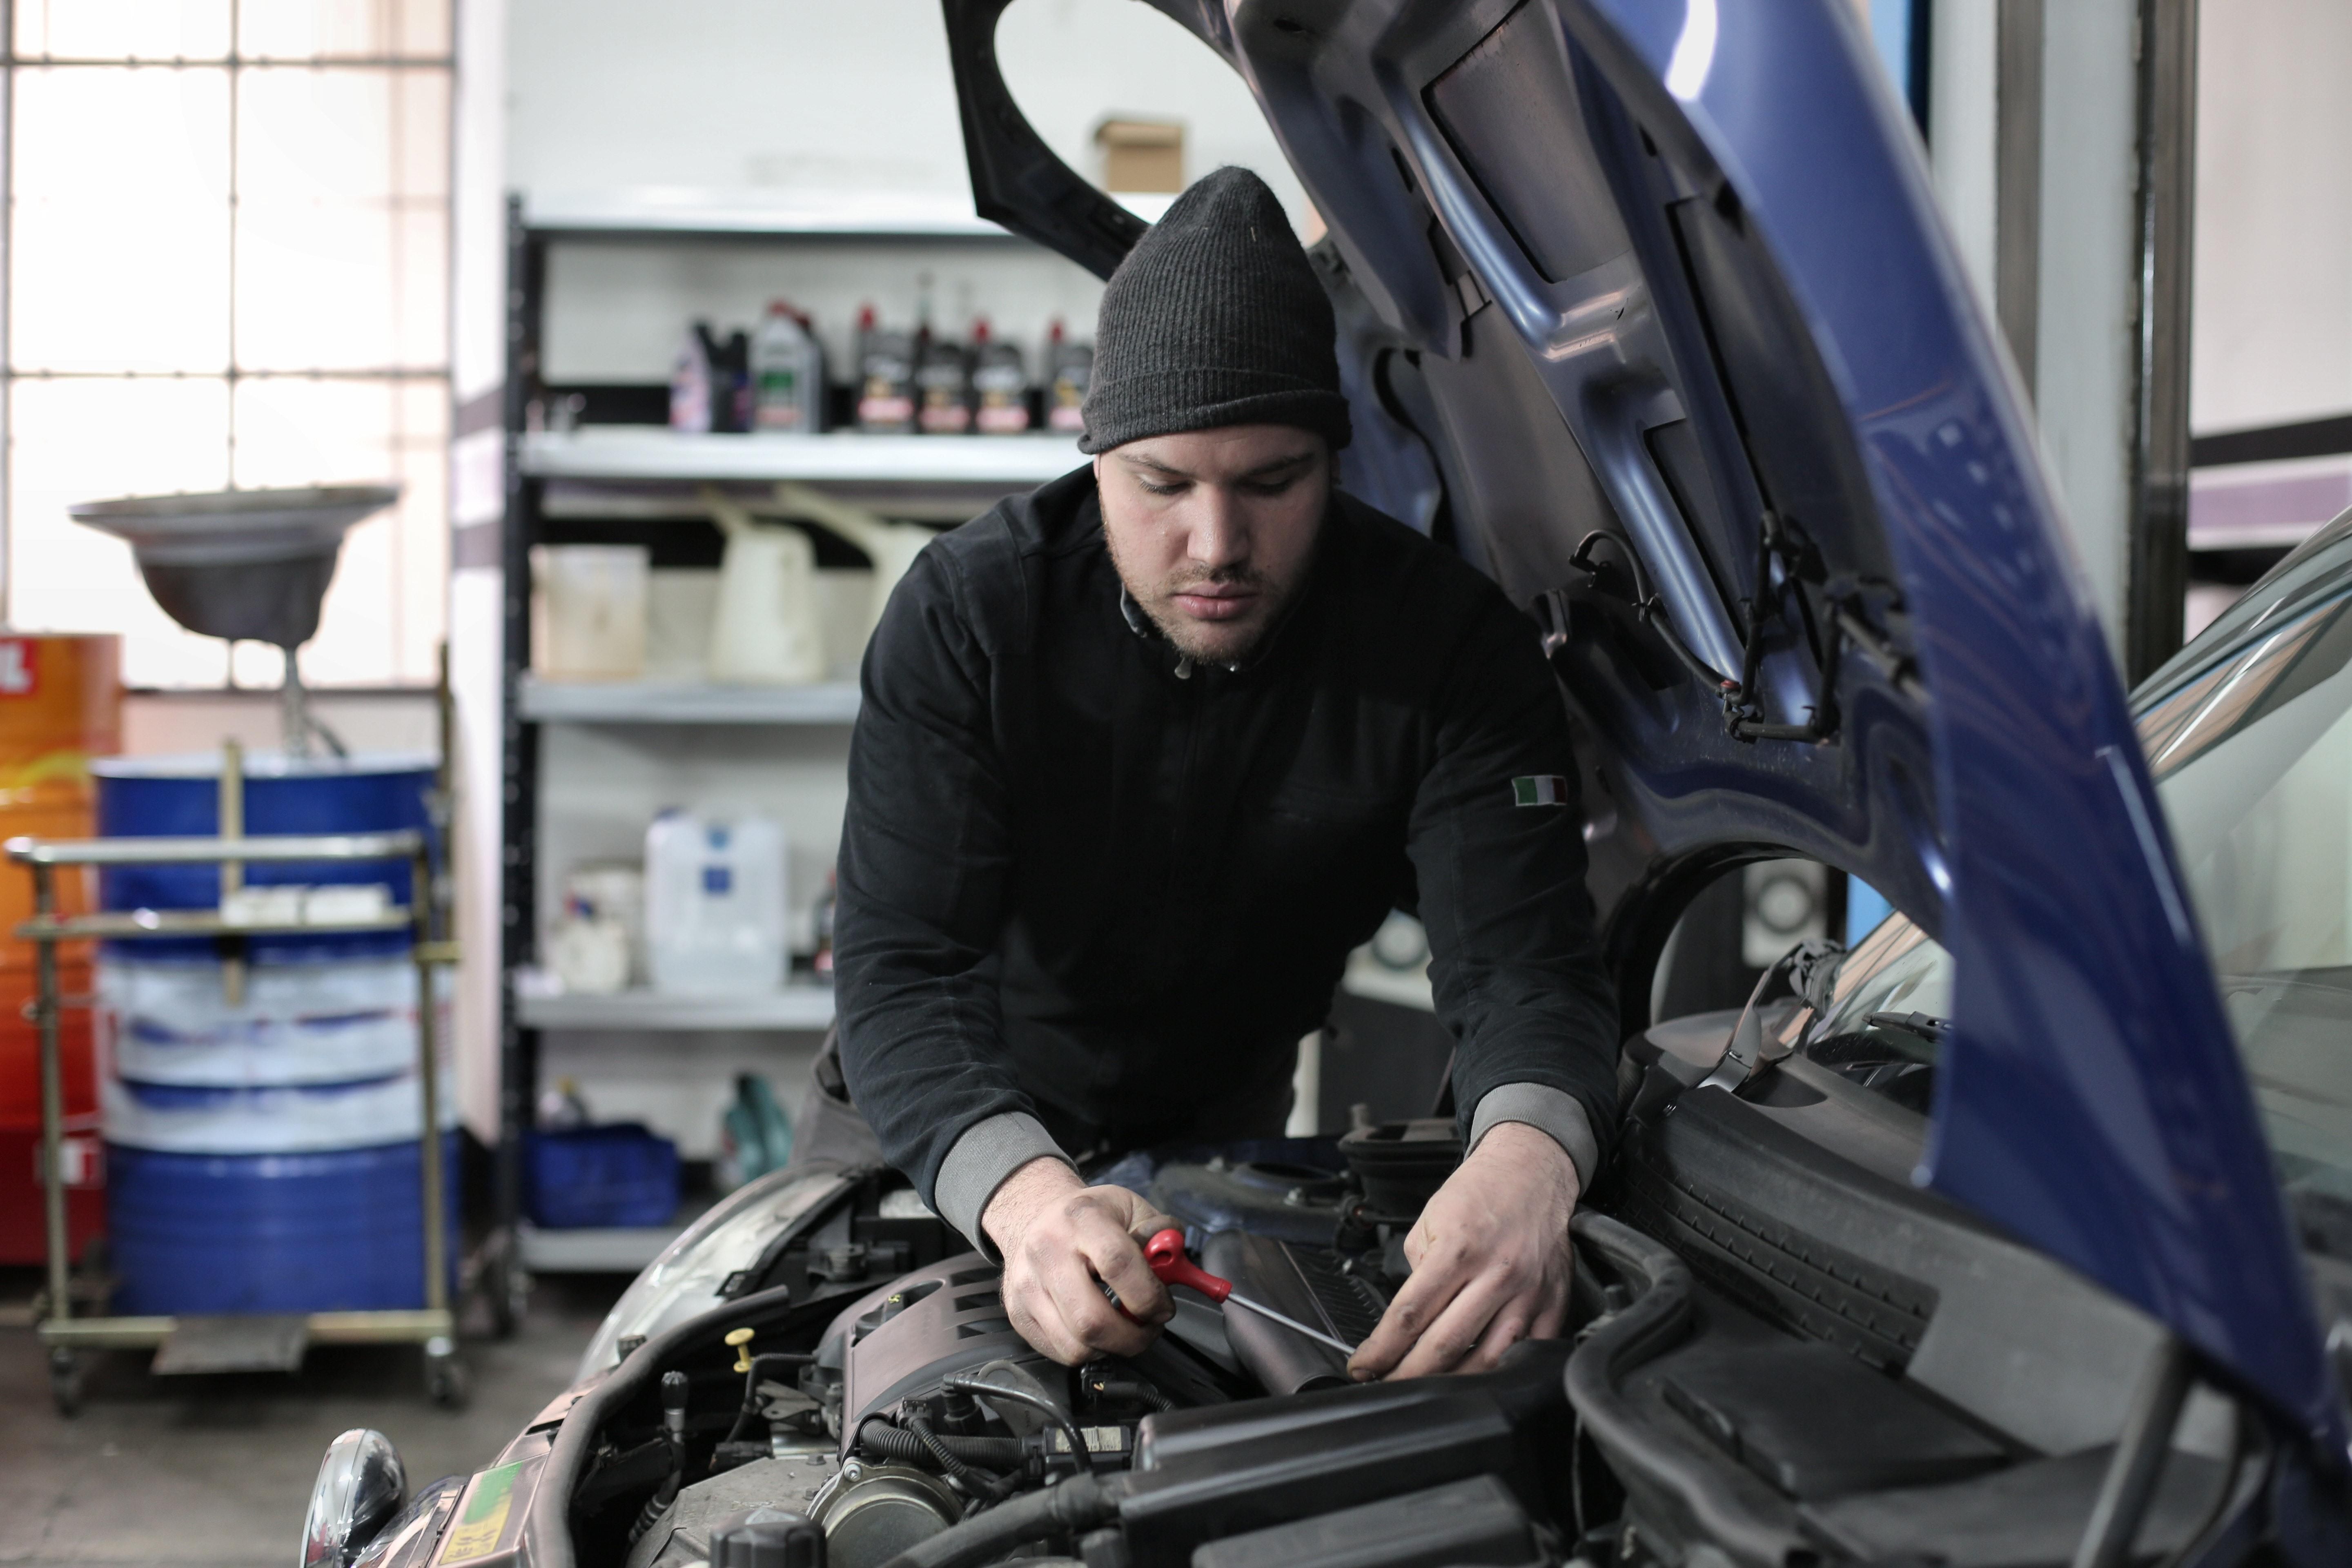 4 Areas of Your Car You Should Focus Getting Maintenance On